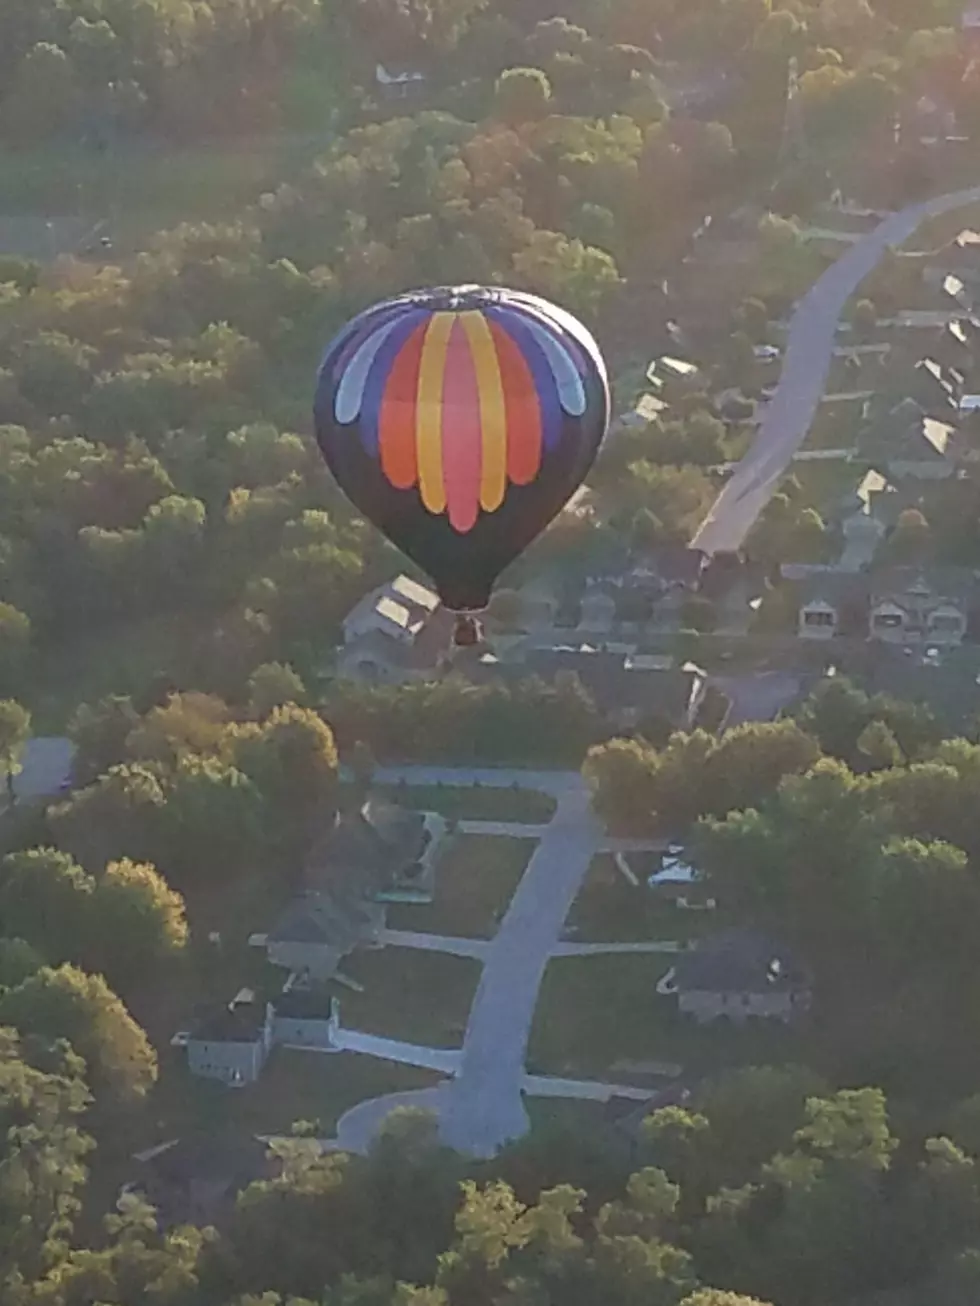 Hot Air Balloons are Coming to Hannibal!